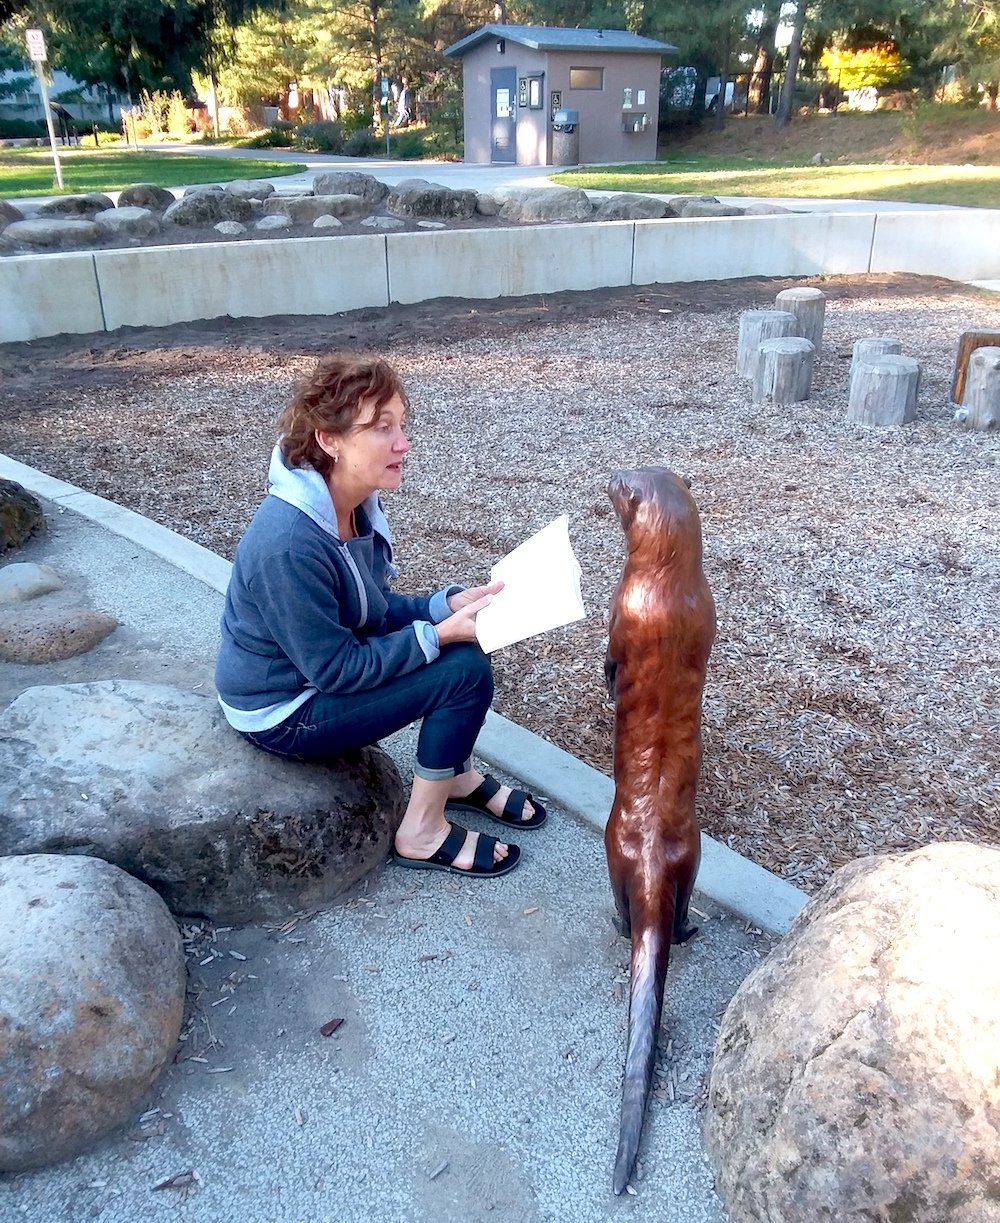 Molly Morriss from New Zealand reading to Slider.